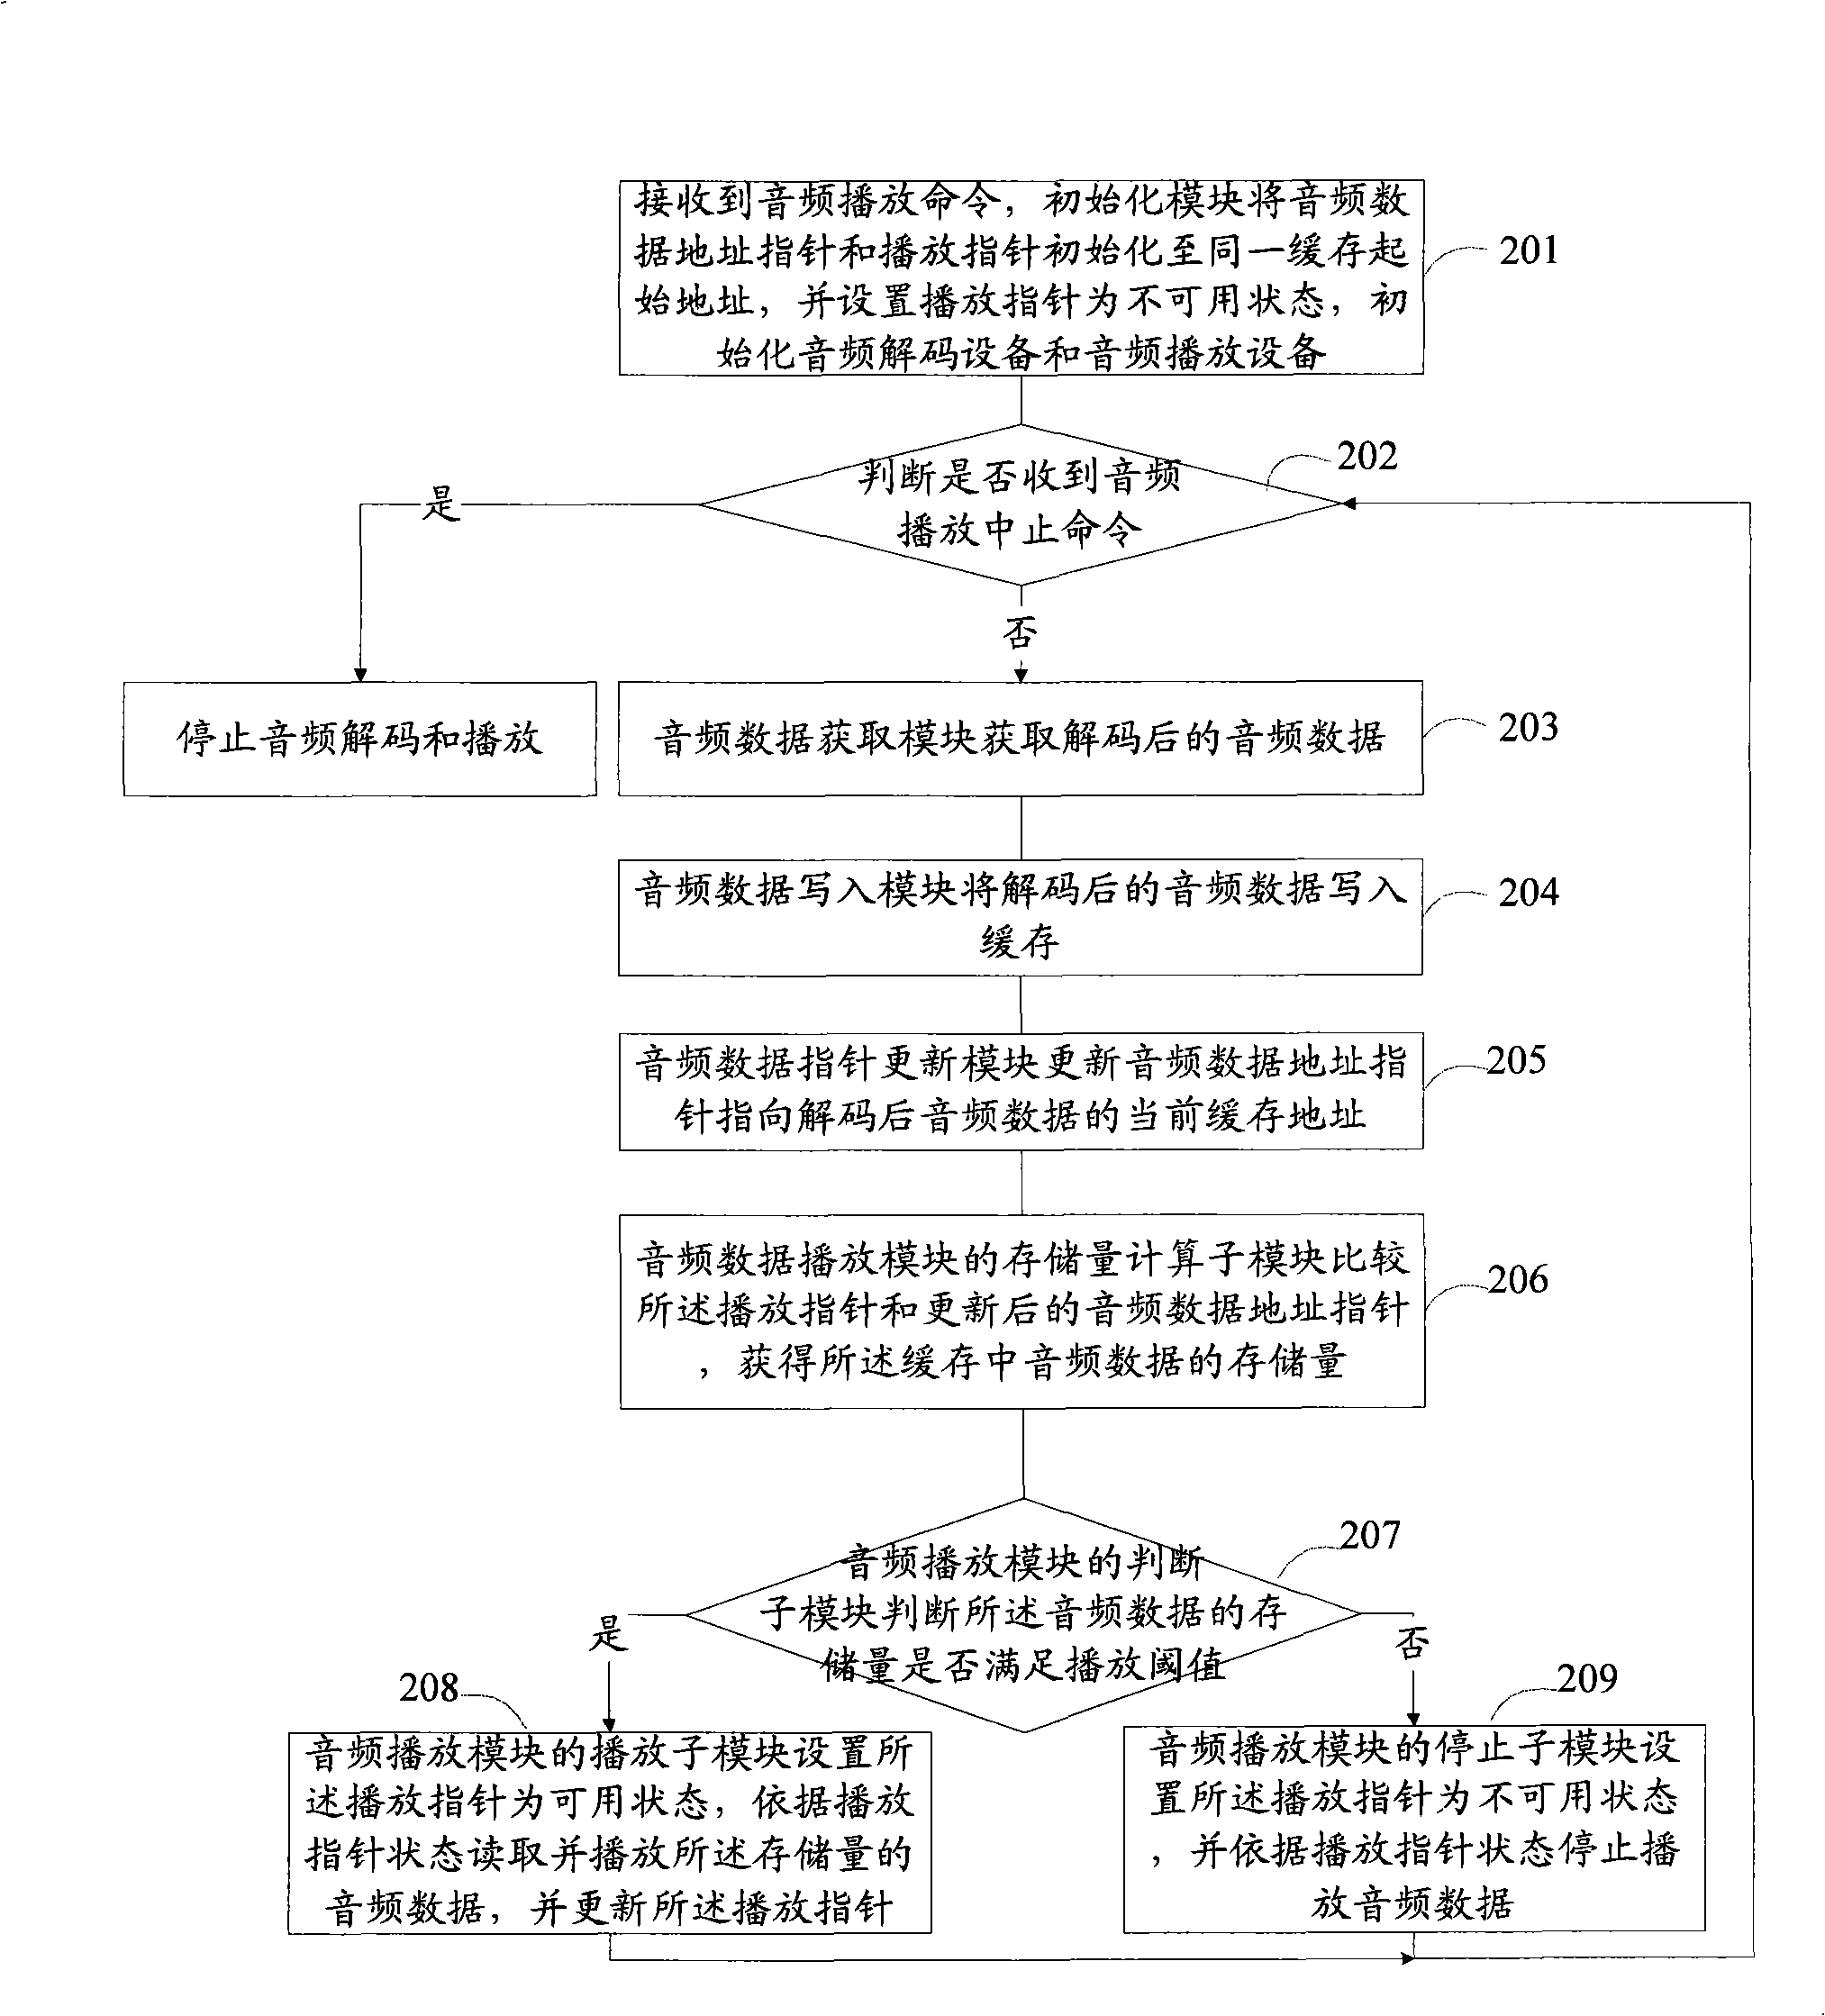 Audio playing apparatus and method, and digital television chip